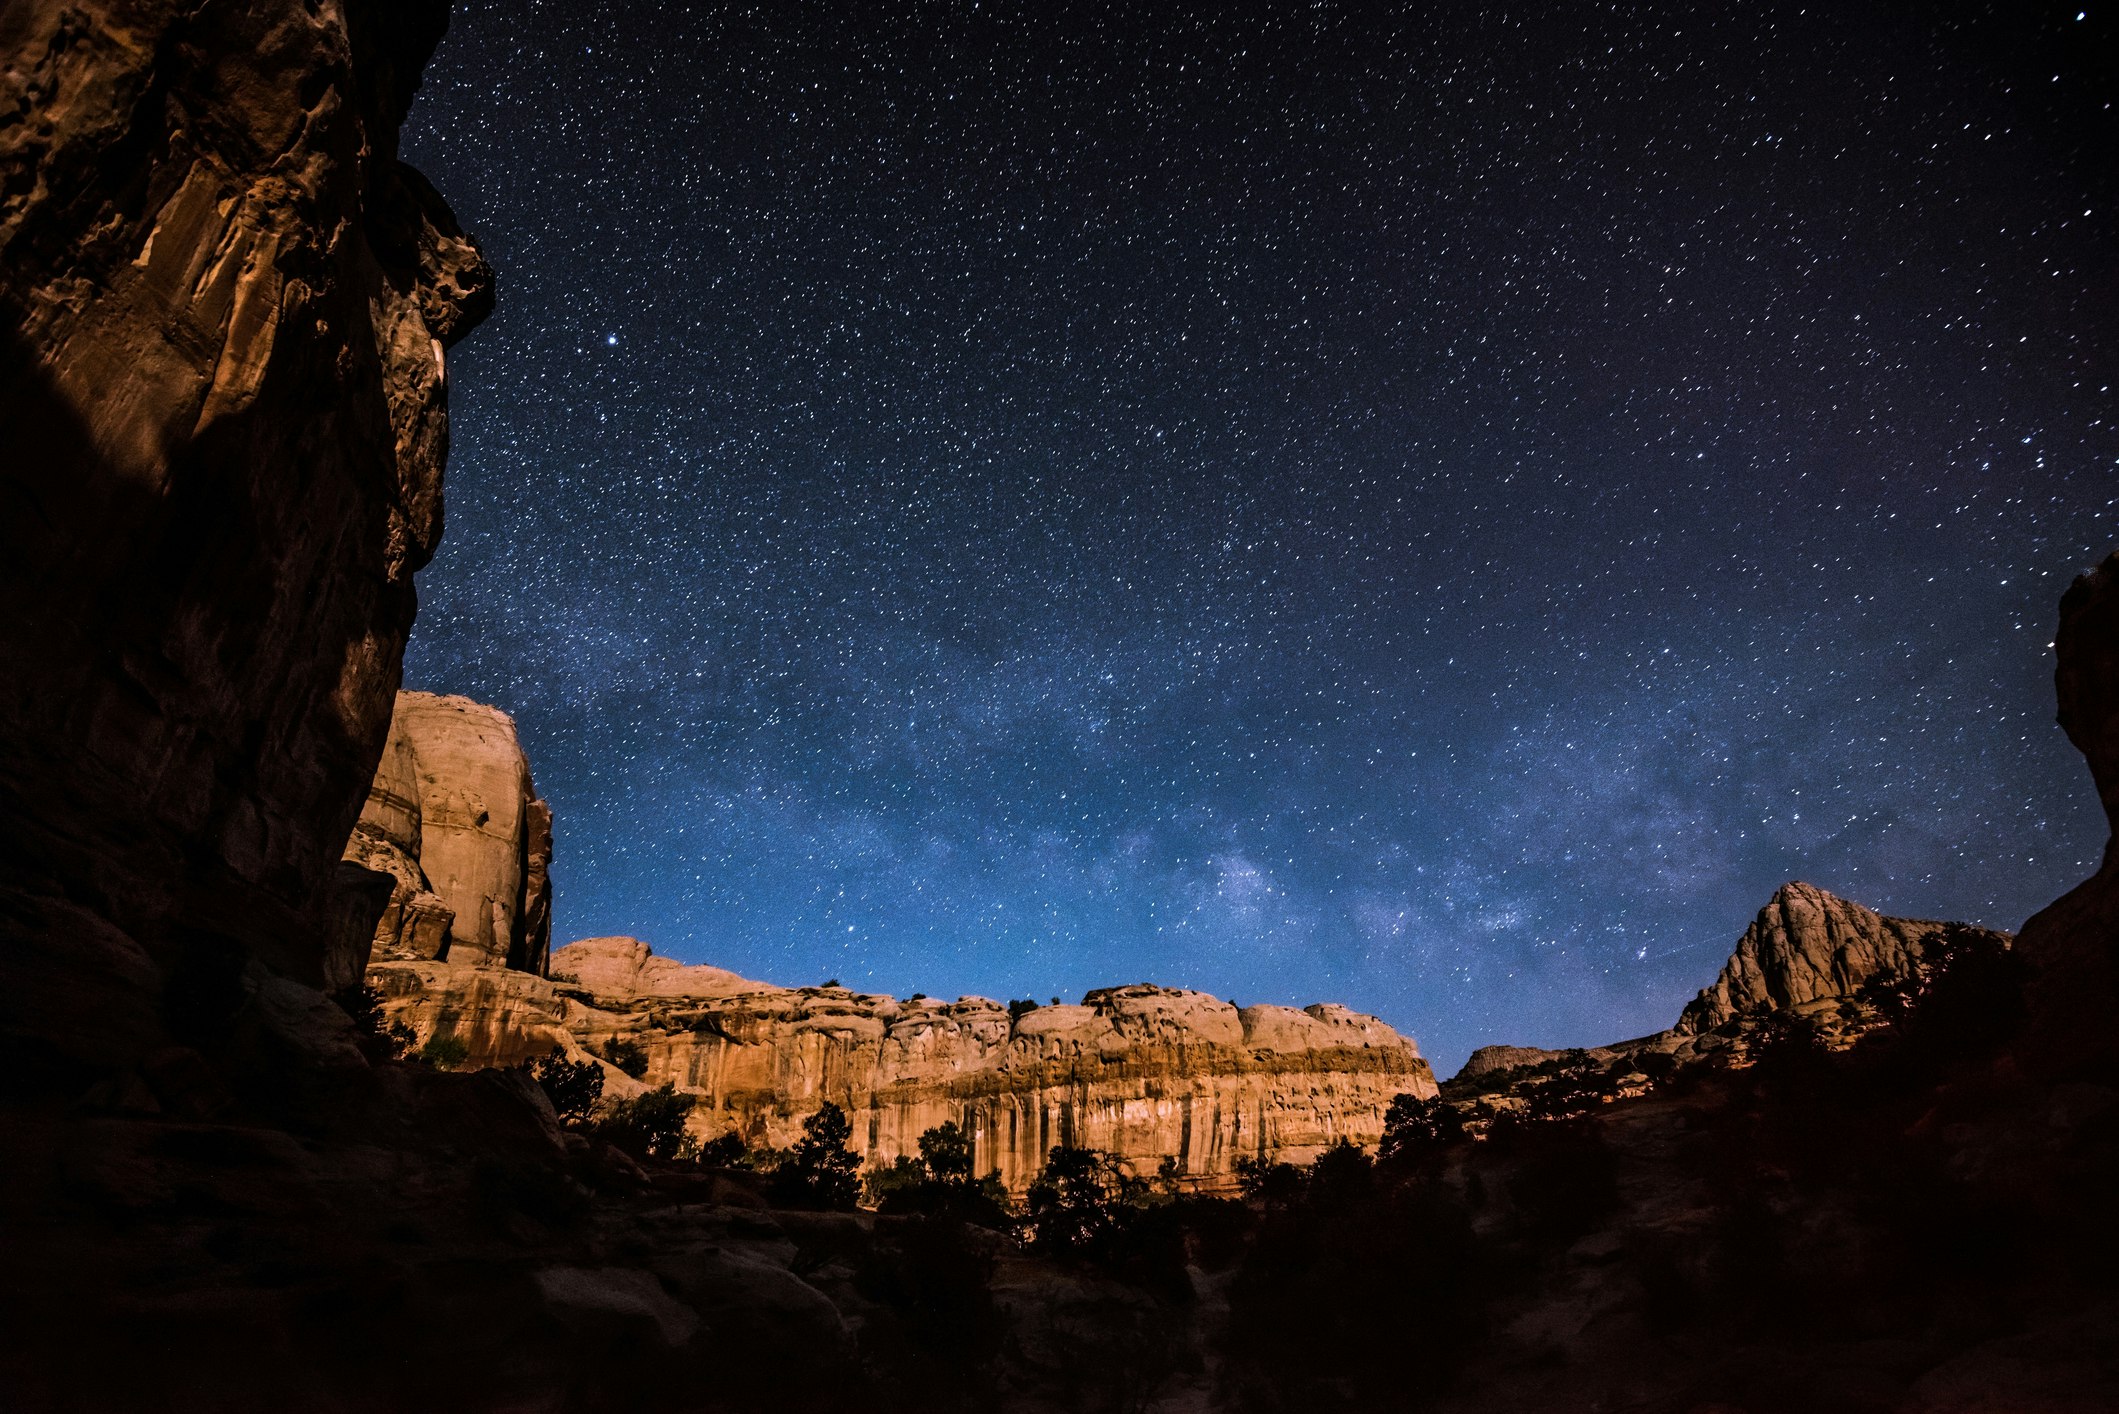 The walls of an orange and brown butte in Capitol Reef National Park in Torrey Utah are brightly illuminated and form a ring framing the bottom and sides of this photo. Within that frame-within-a-frame is a denim blue sky that fades to deep navy at the top edge dotted with white stars